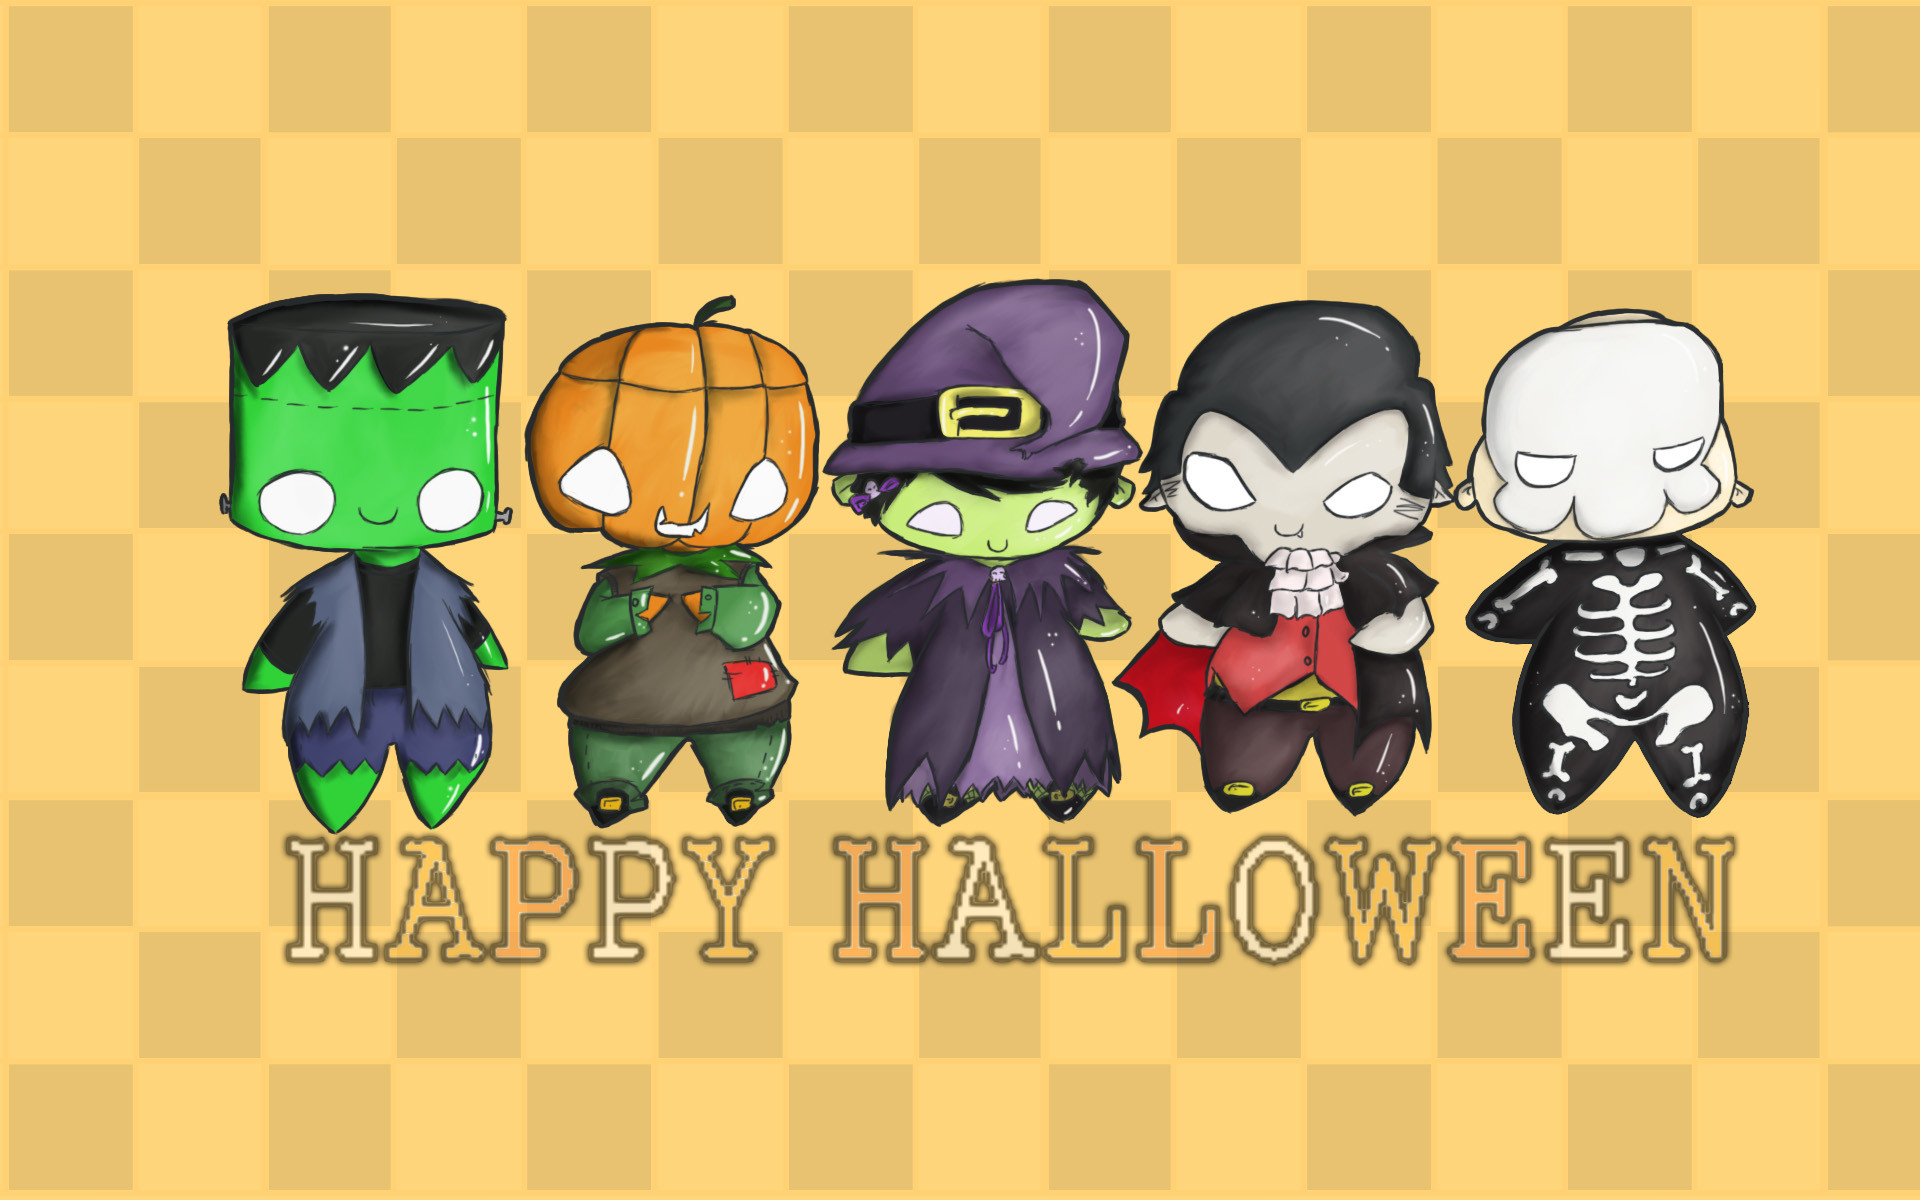 1920x1200 Happy Halloween everyone! wallpapers and stock photos